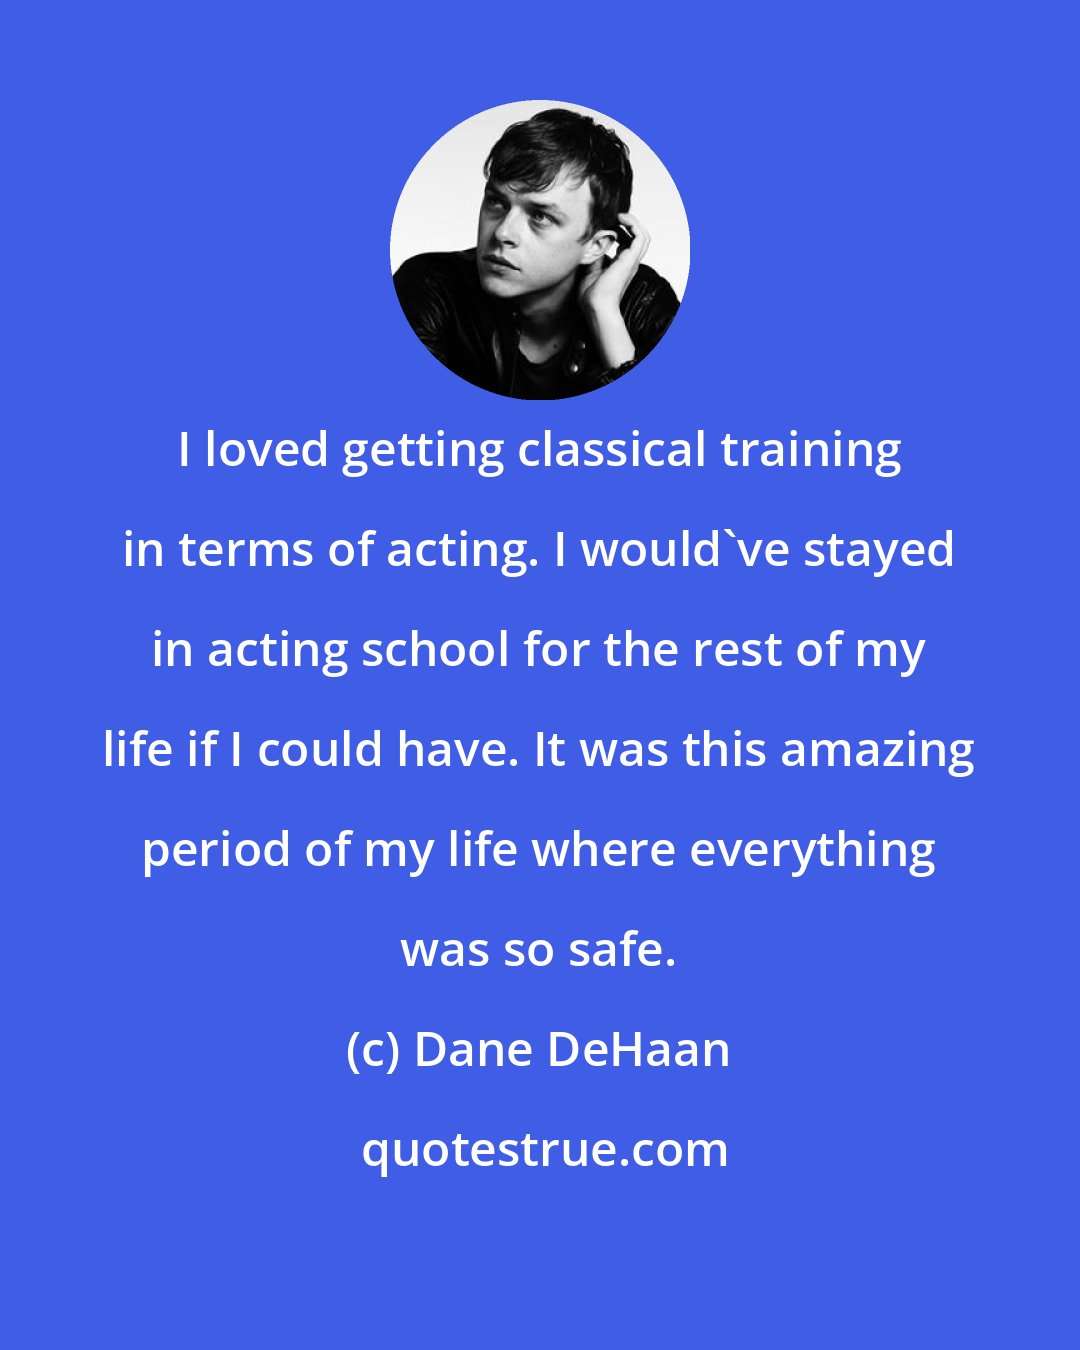 Dane DeHaan: I loved getting classical training in terms of acting. I would've stayed in acting school for the rest of my life if I could have. It was this amazing period of my life where everything was so safe.